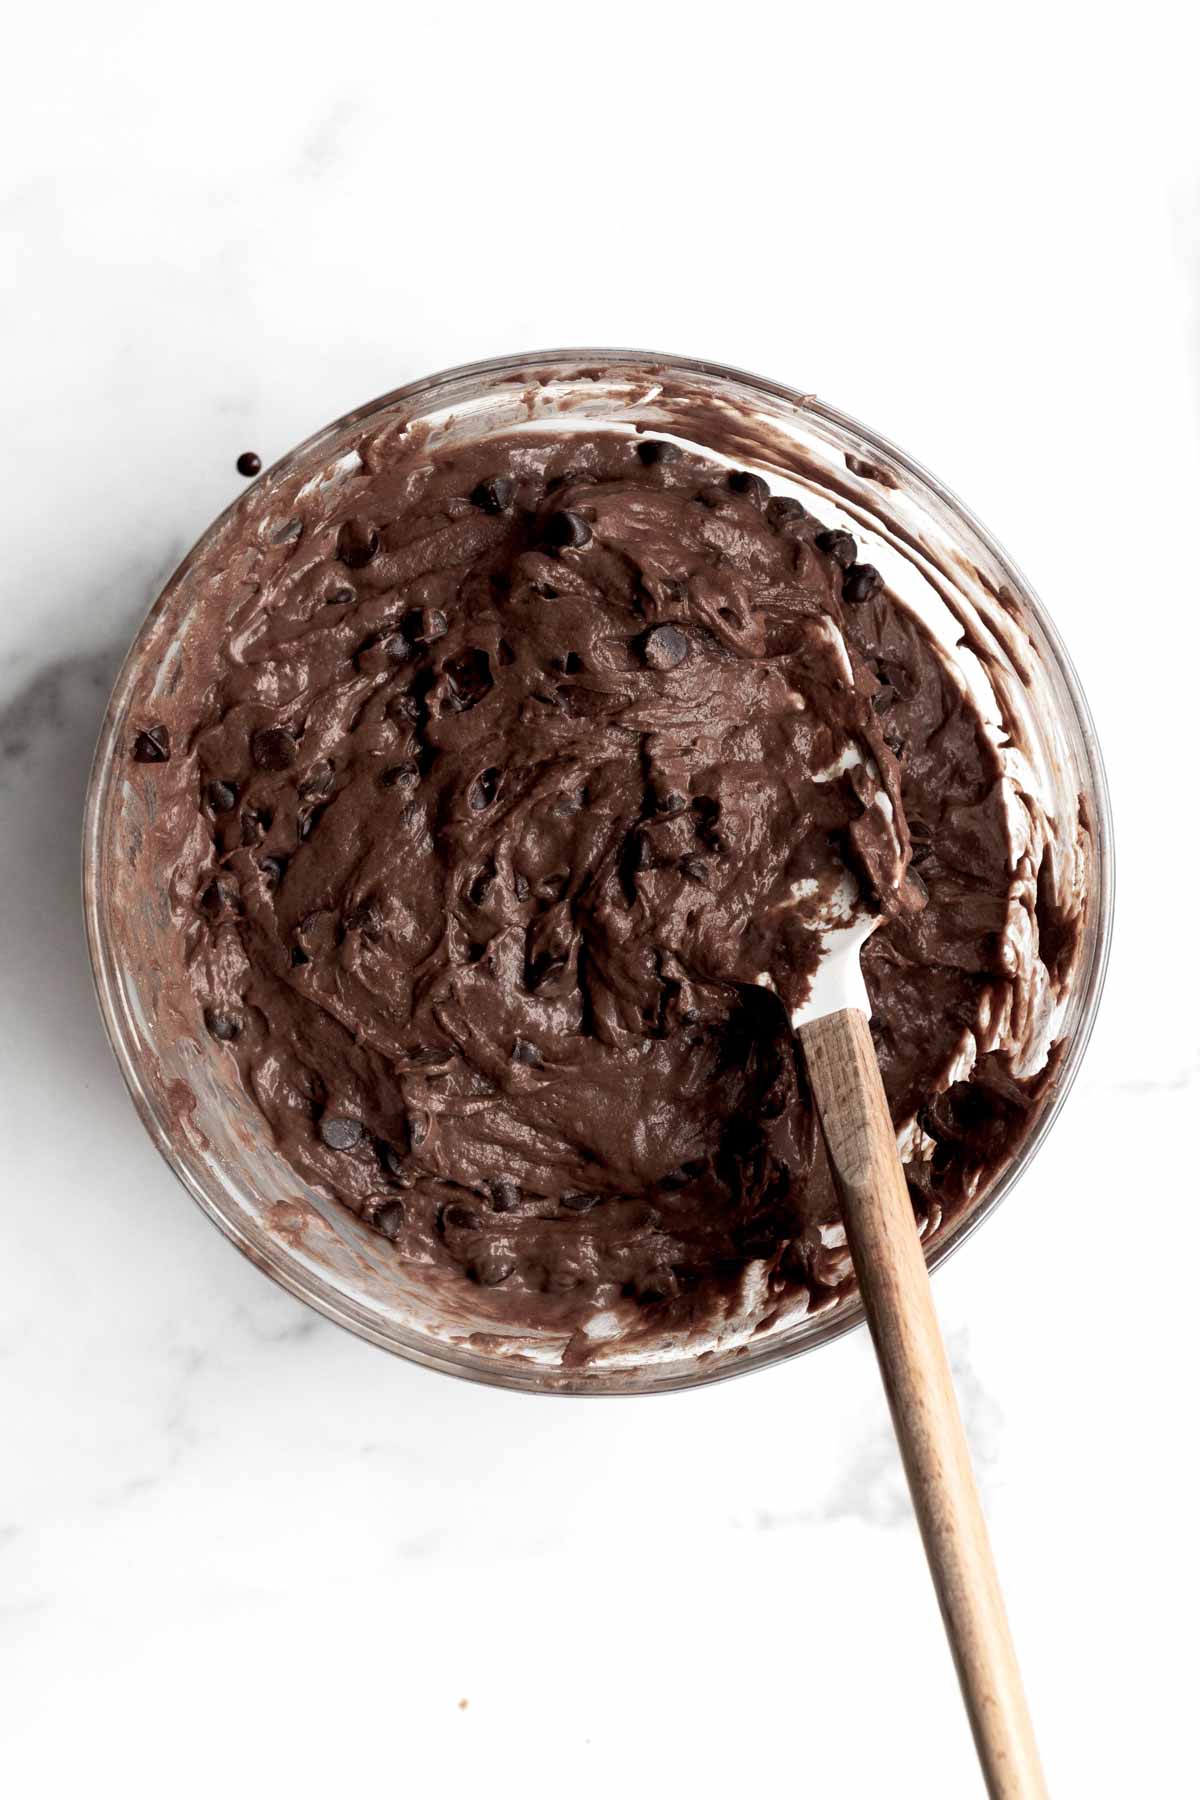 A bowl with thoroughly mixed chocolate chips and batter.